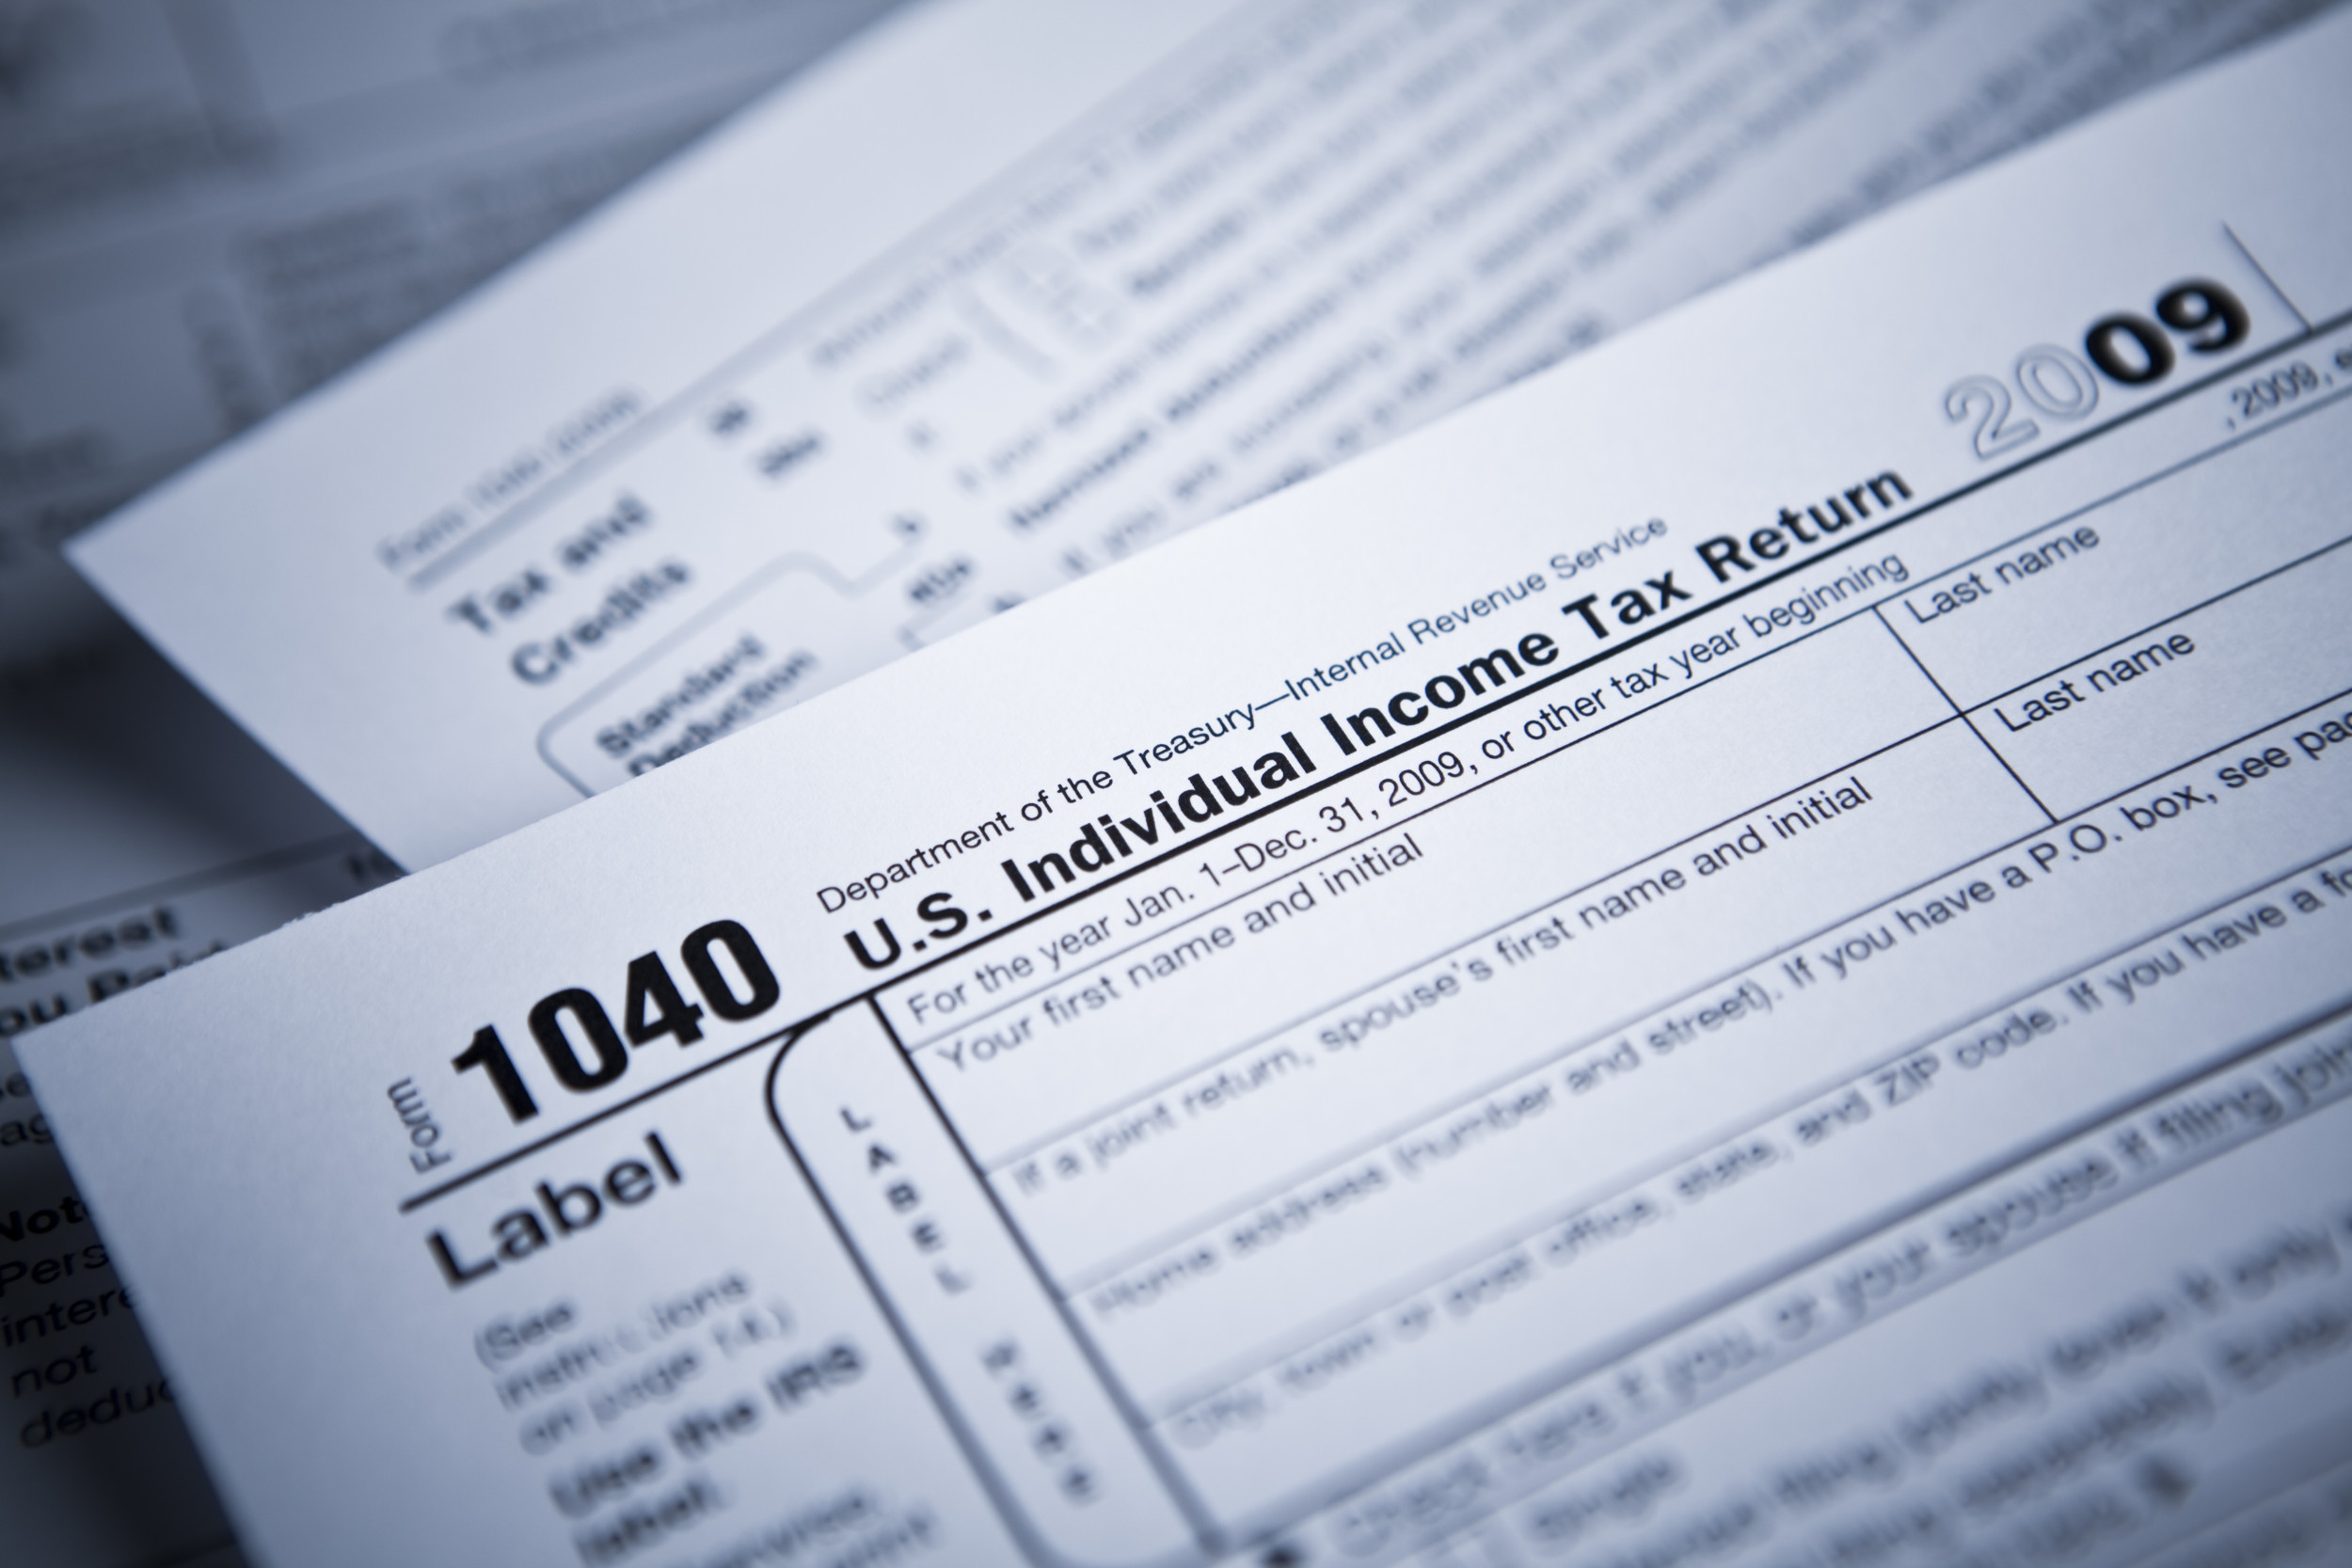 How to File Your Taxes at the Last Minute or Get an Extension